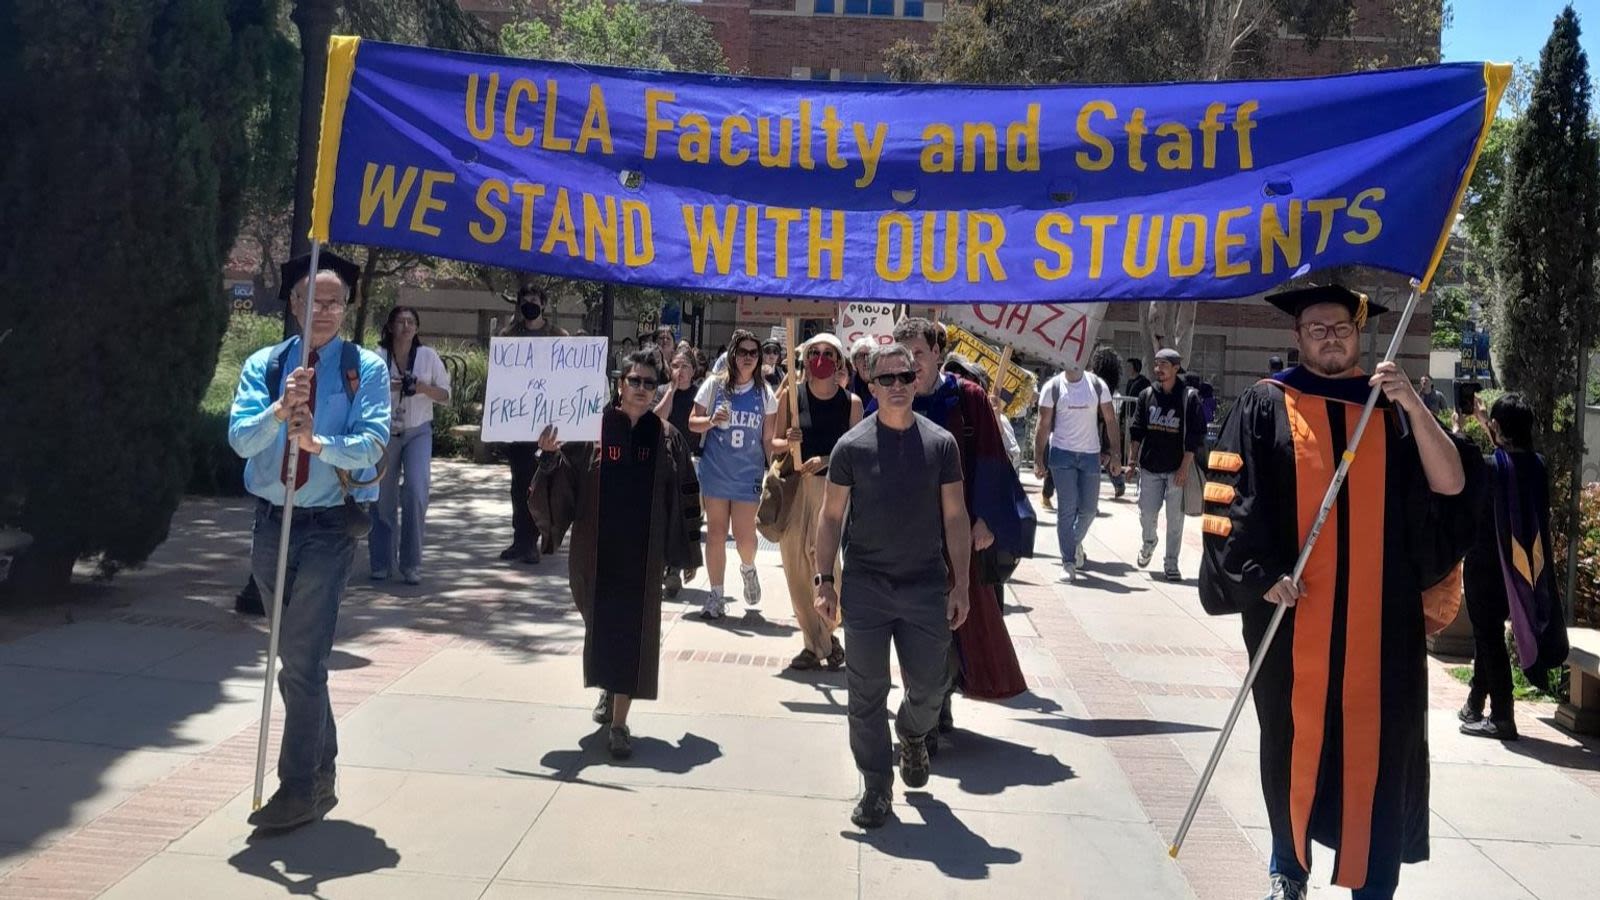 As California academic workers begin strike authorization vote, protests against Gaza genocide continue